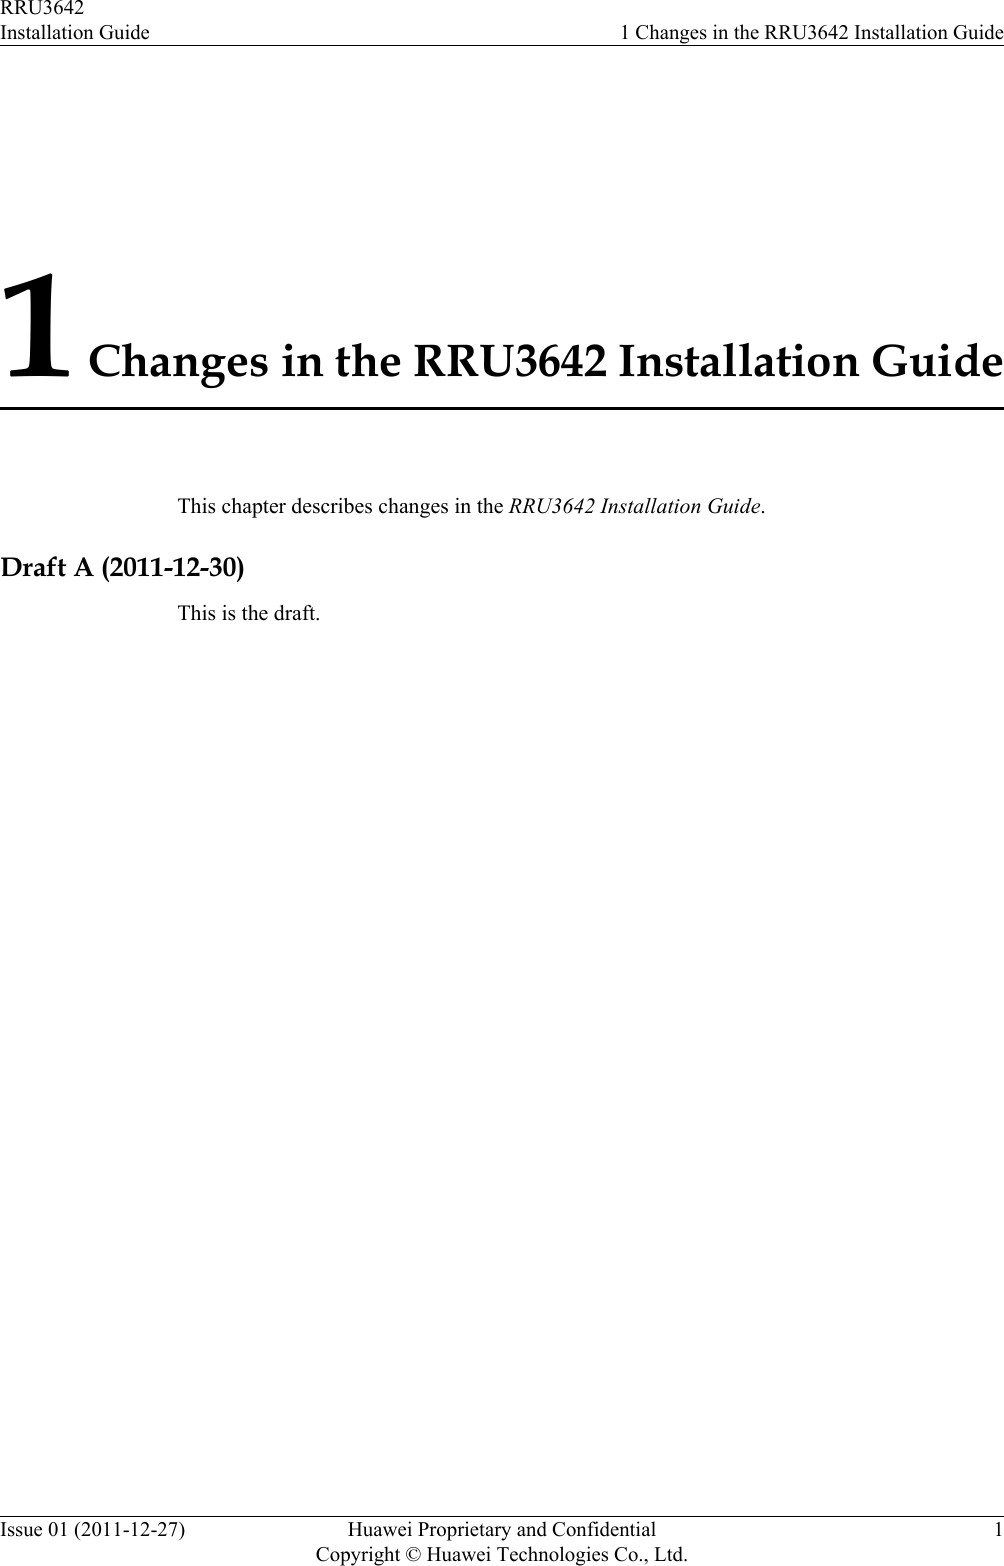 1 Changes in the RRU3642 Installation GuideThis chapter describes changes in the RRU3642 Installation Guide.Draft A (2011-12-30)This is the draft.RRU3642Installation Guide 1 Changes in the RRU3642 Installation GuideIssue 01 (2011-12-27) Huawei Proprietary and ConfidentialCopyright © Huawei Technologies Co., Ltd.1